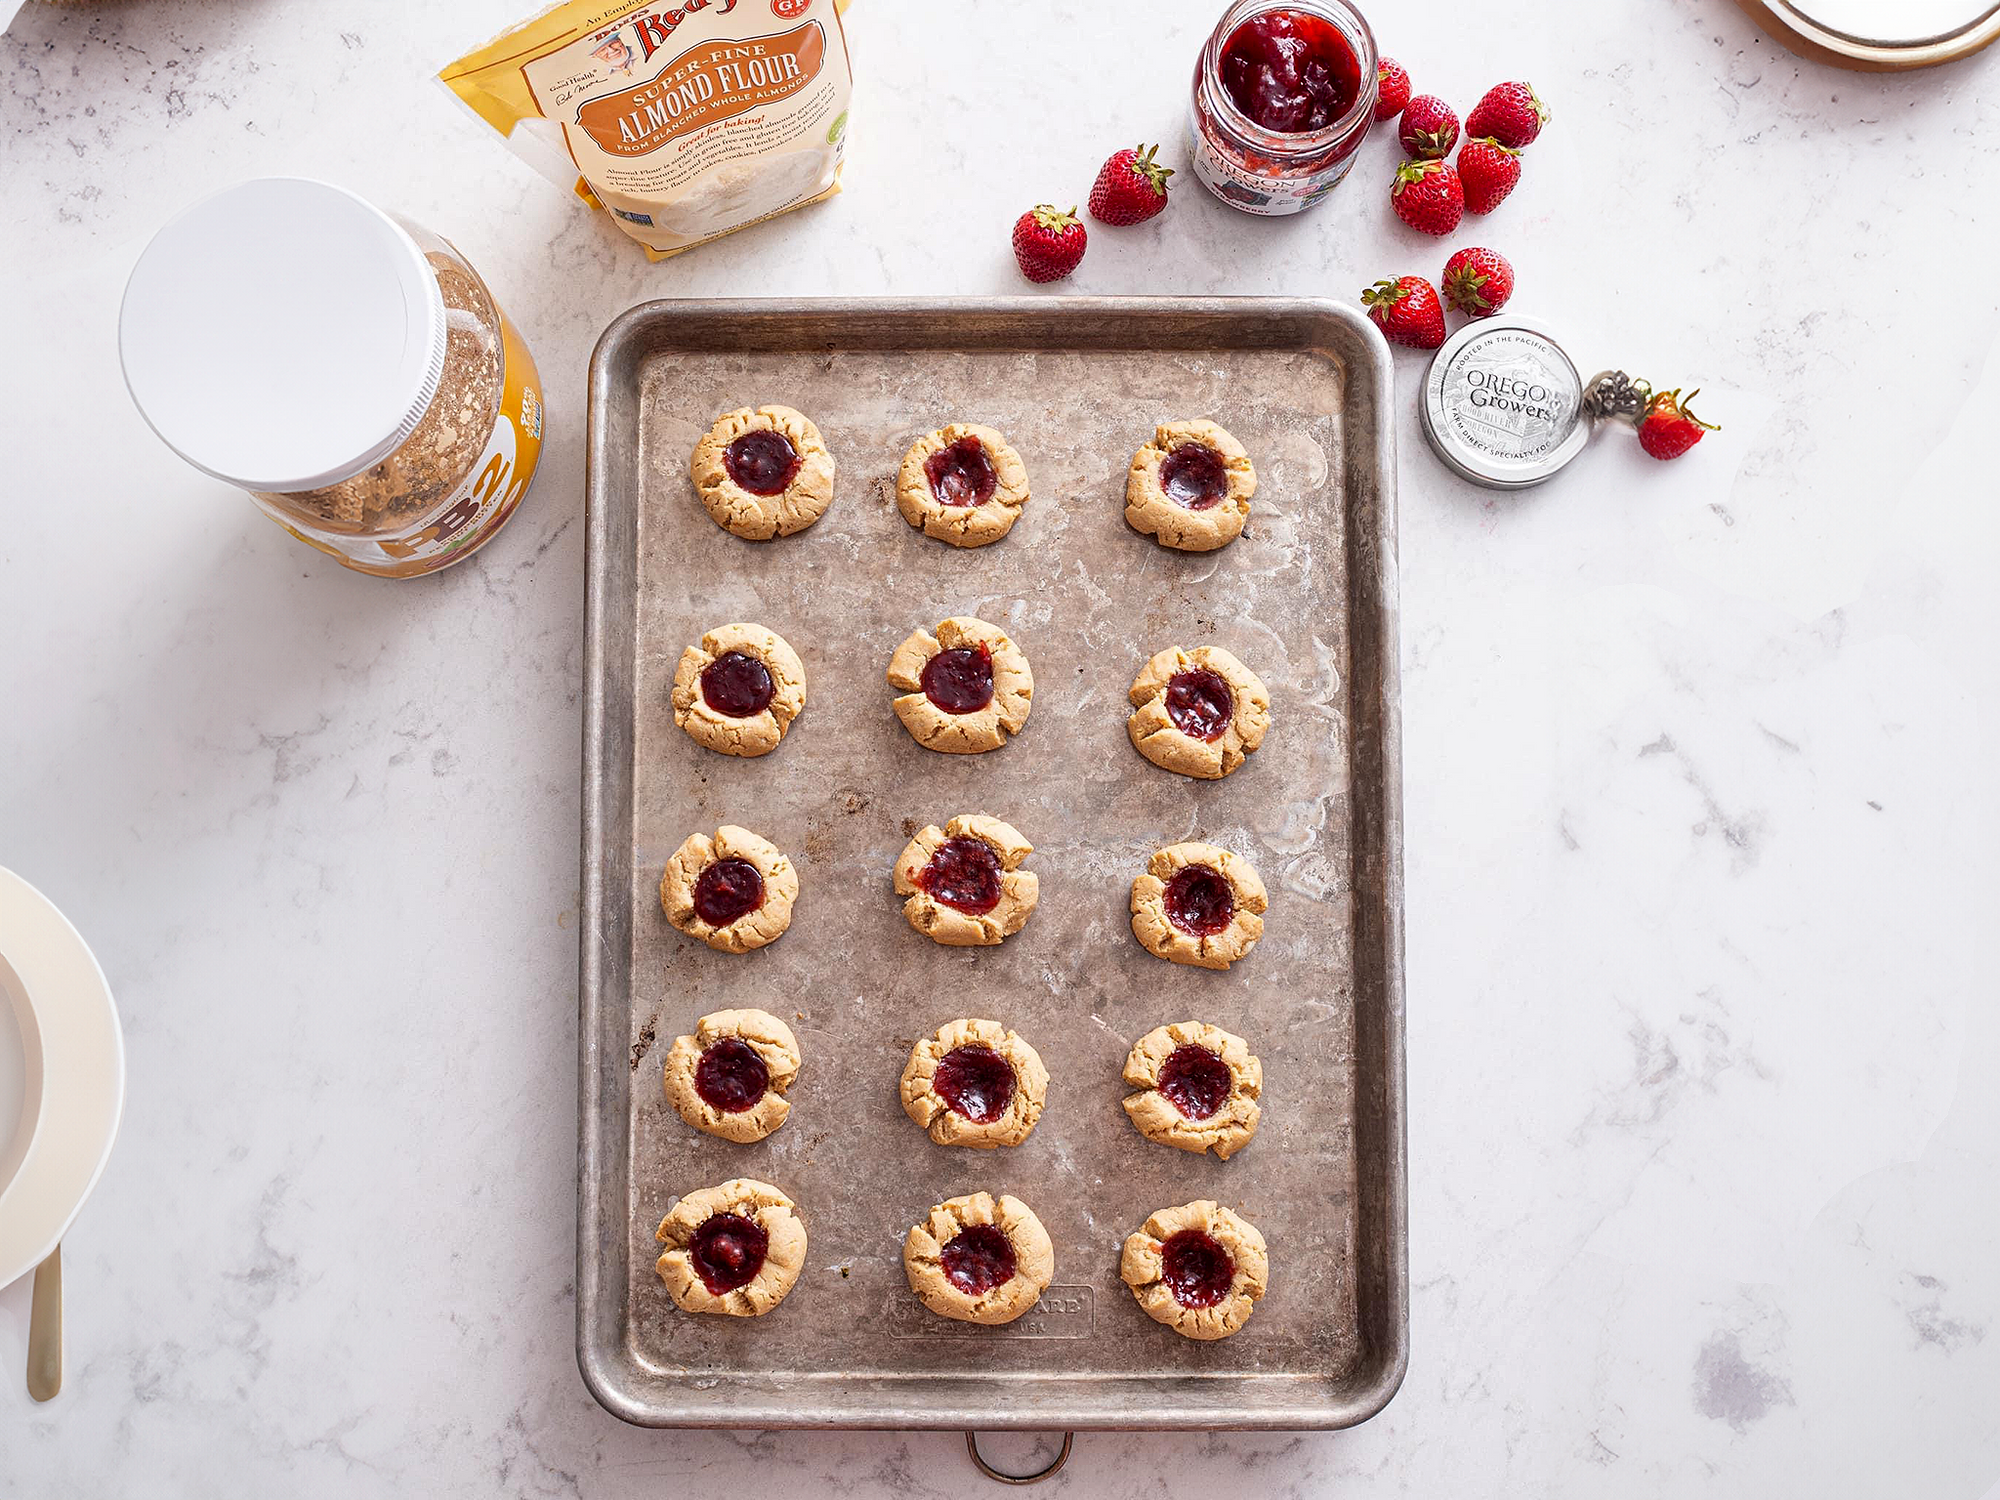 Peanut Butter and Strawberry Thumbprint Cookies on a cookie sheet with a jar of Oregon Growers Strawberry Jam and peanut butter  on the side.